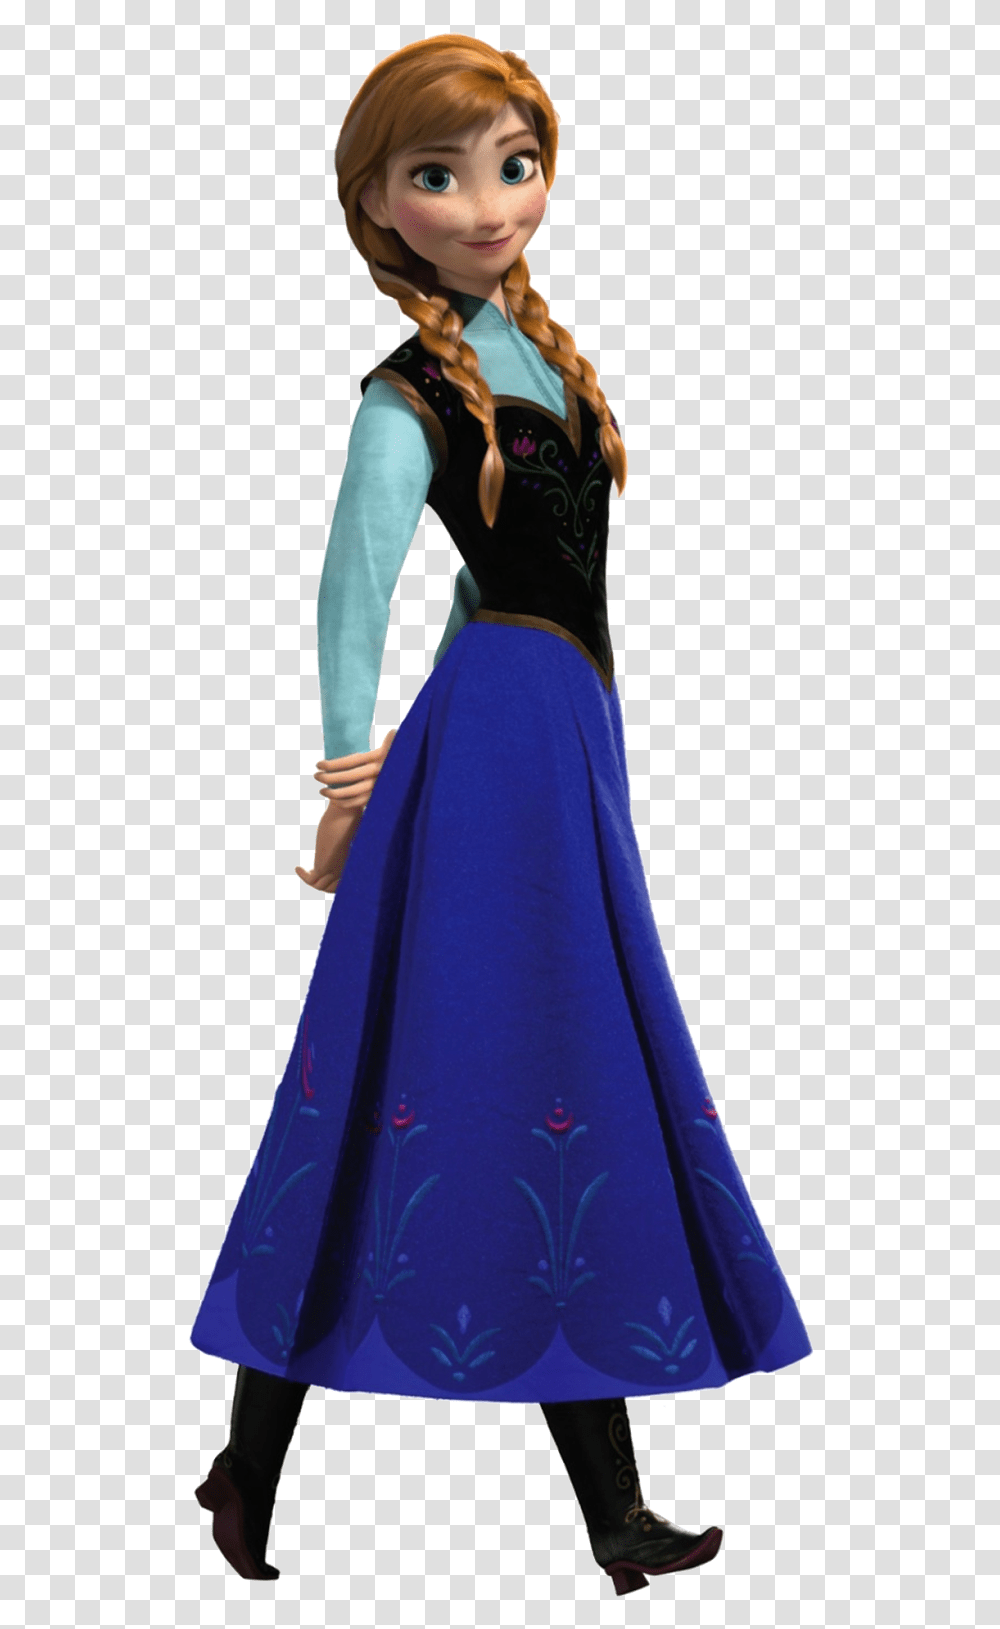 Frozen Images Olaf Anna Frozen, Evening Dress, Robe, Gown Transparent Png